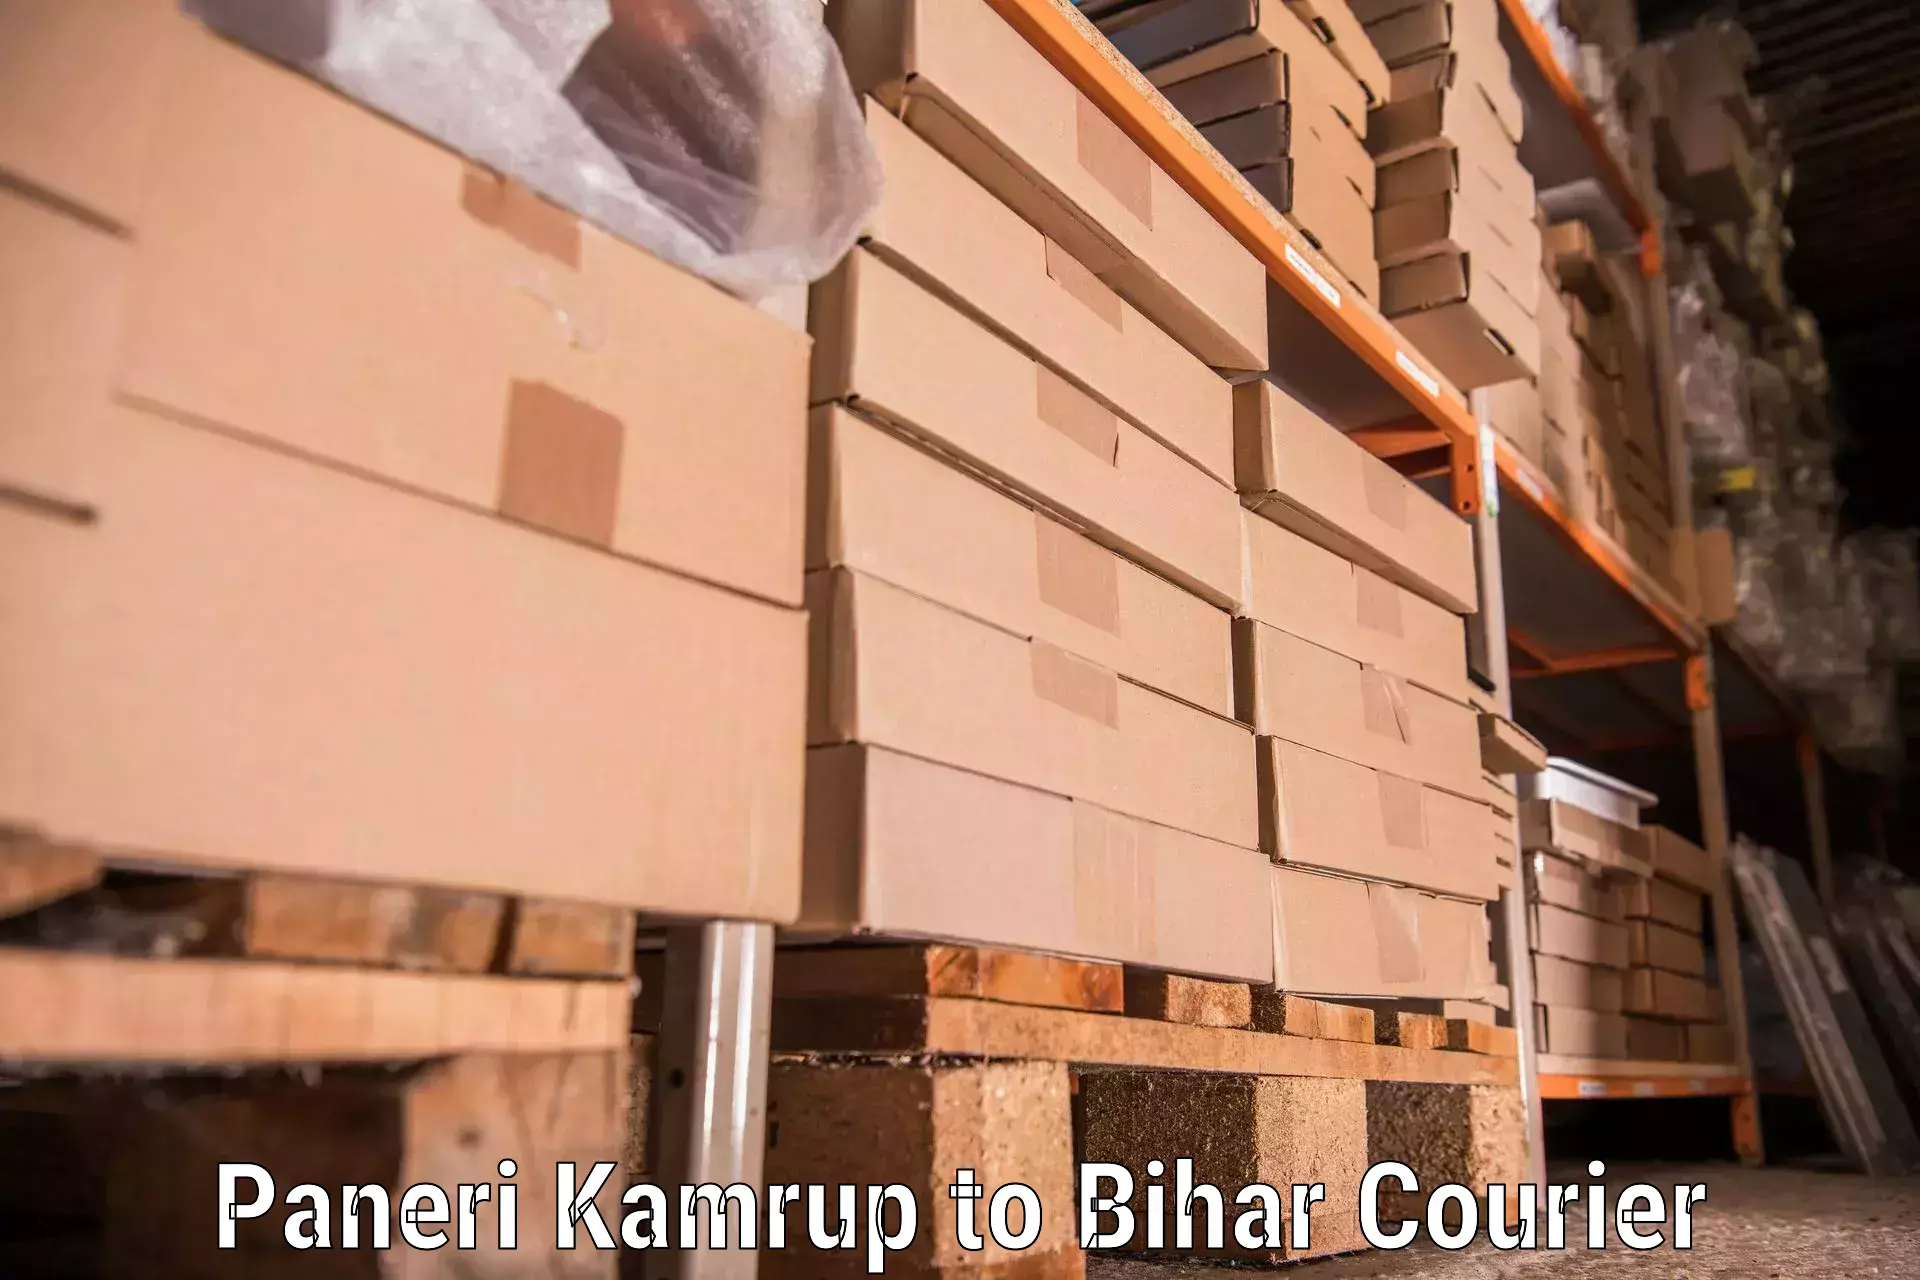 Moving and storage services in Paneri Kamrup to Bihar